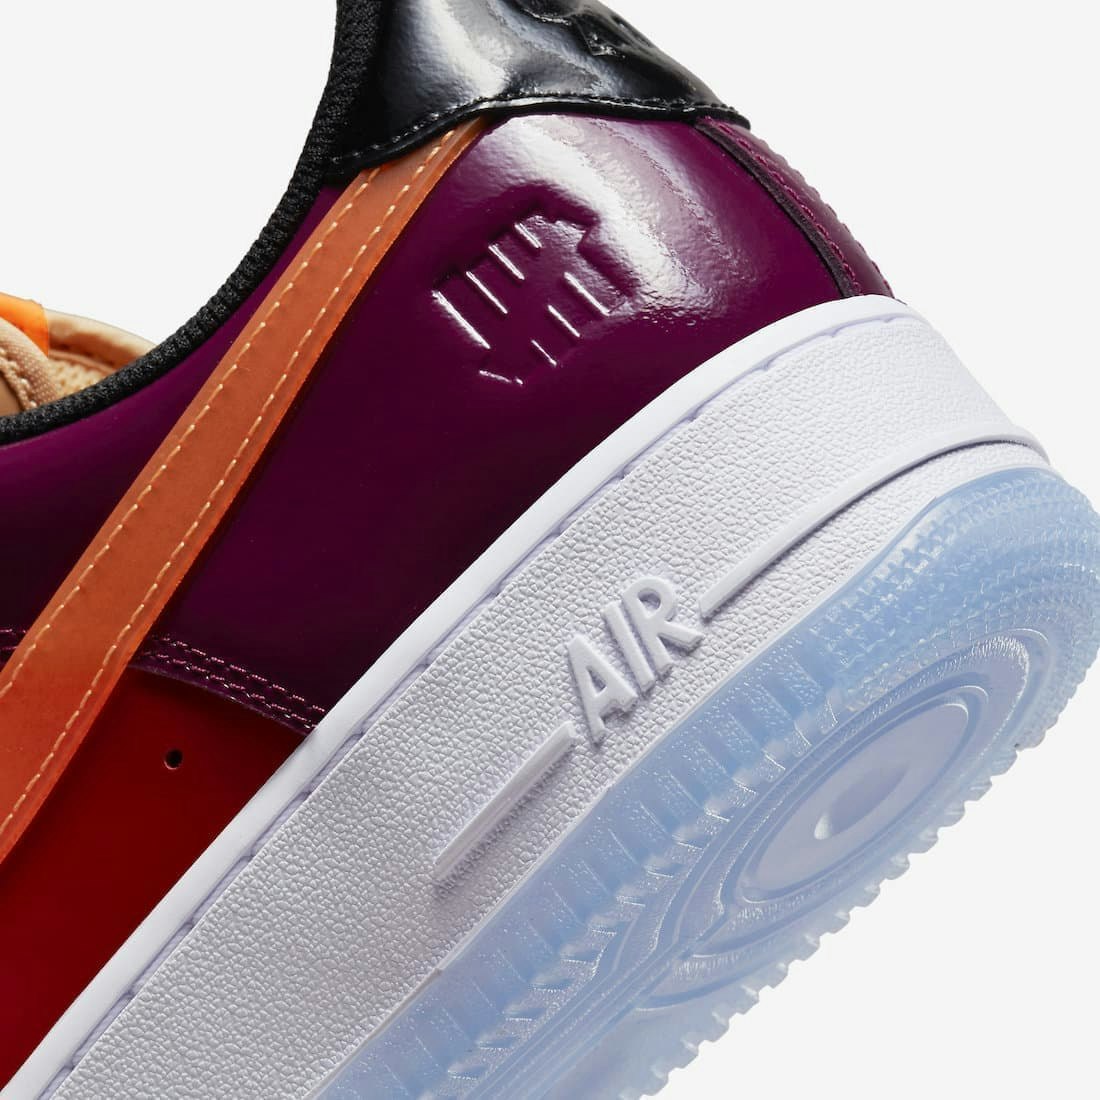 Undefeated x Nike Air Force 1 Low "Burgundy Tail"